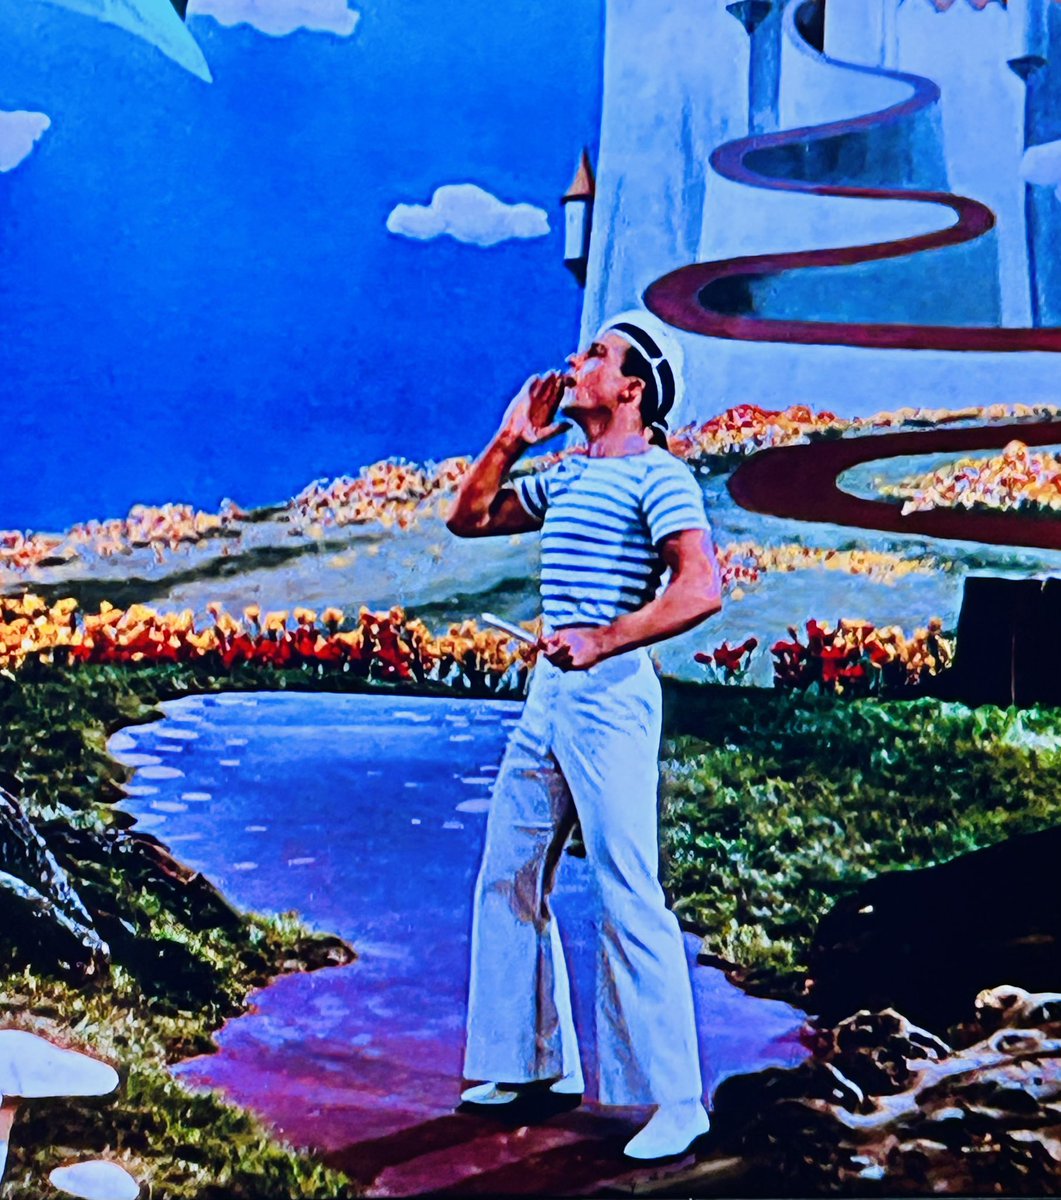 A horizontal striped t-shirt and wide legged trousers is my go-to outfit 90% of the time. #AnchorsAweigh #TCMParty